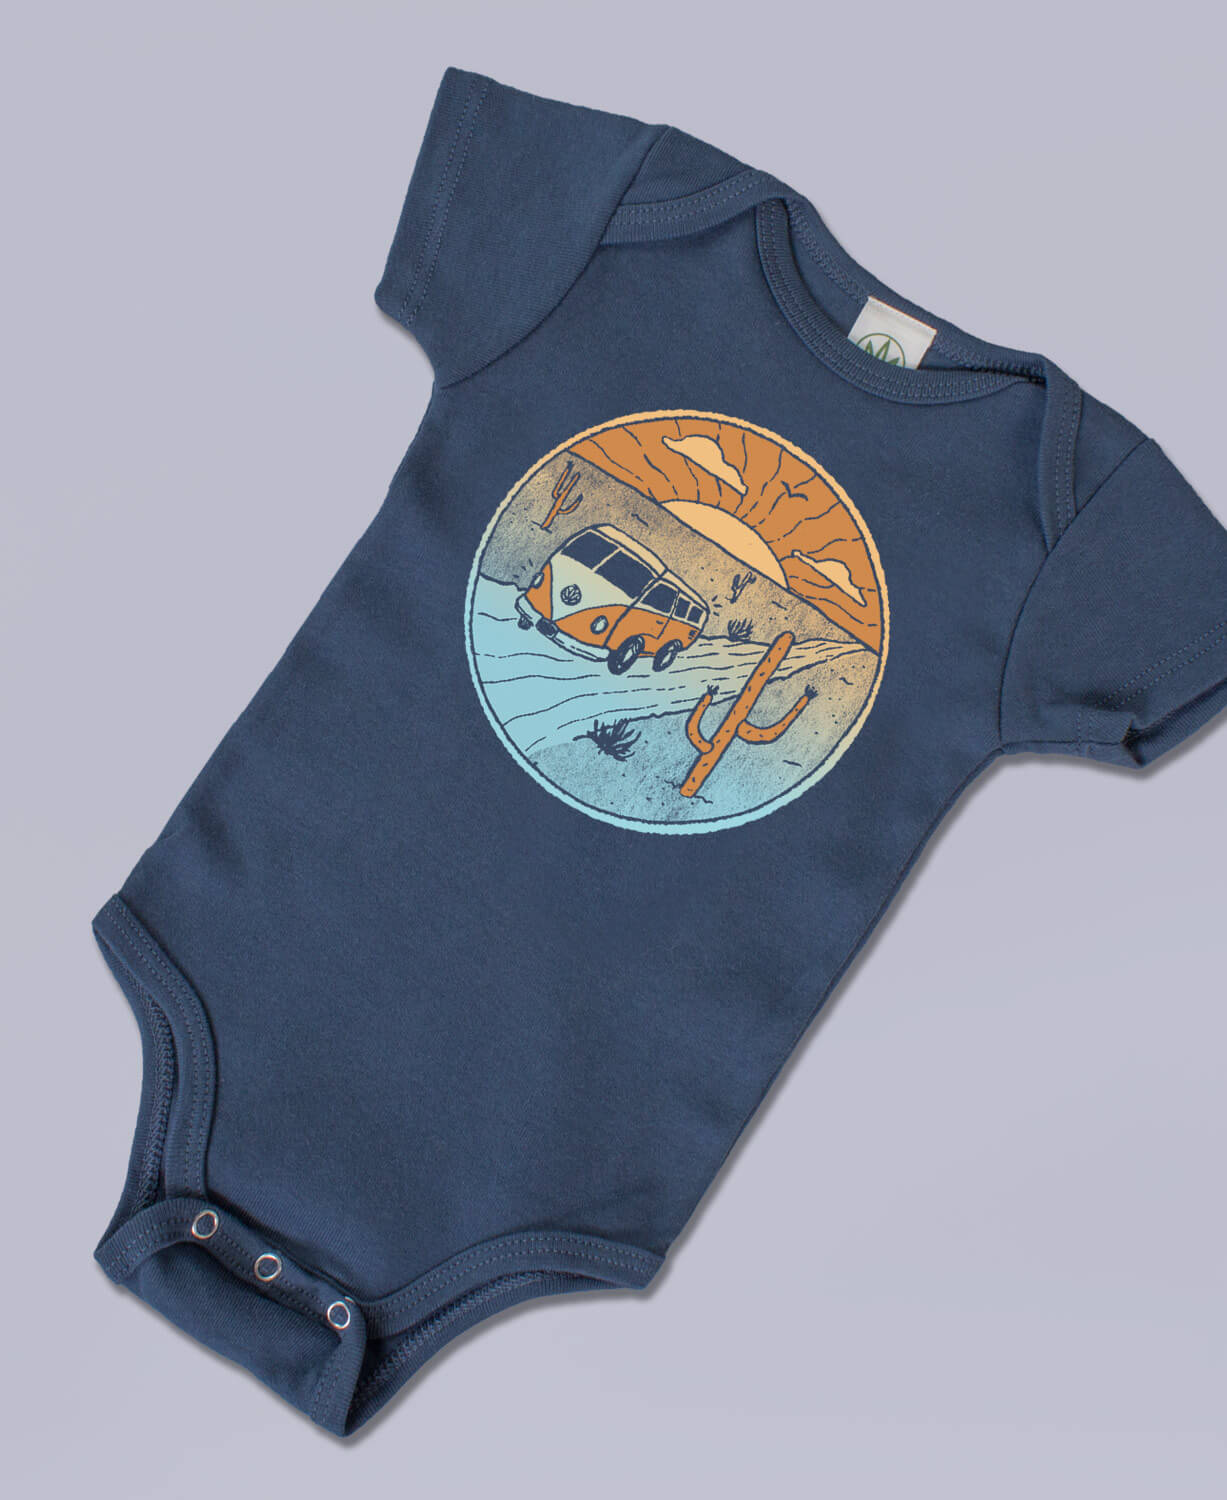 Baby Camper Baby Grow VW Camper Baby Clothes Sleepsuit